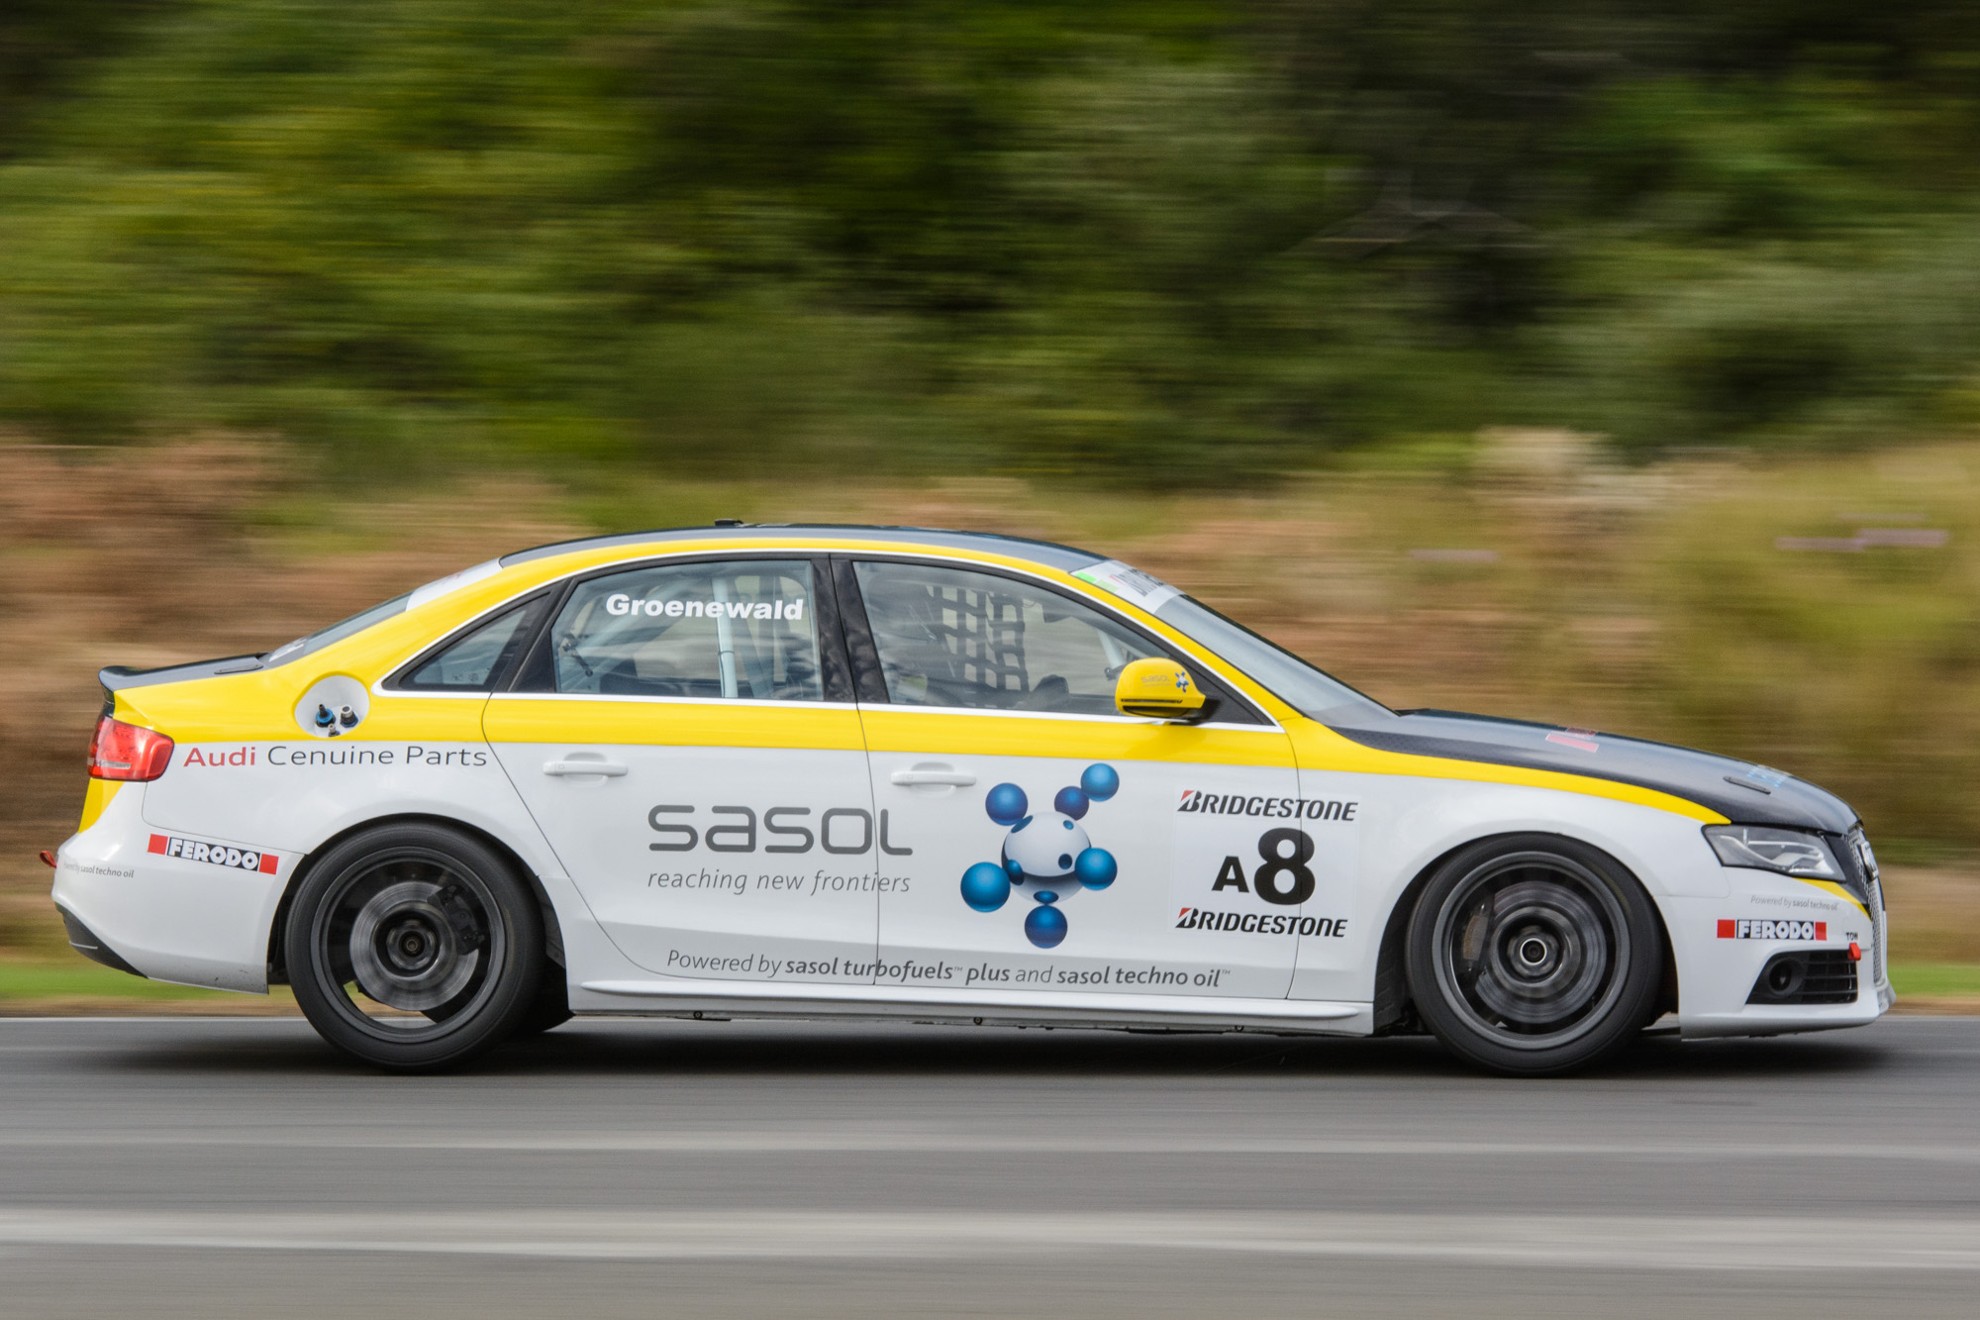 Back to action for Audi S4 quattro Race Cars